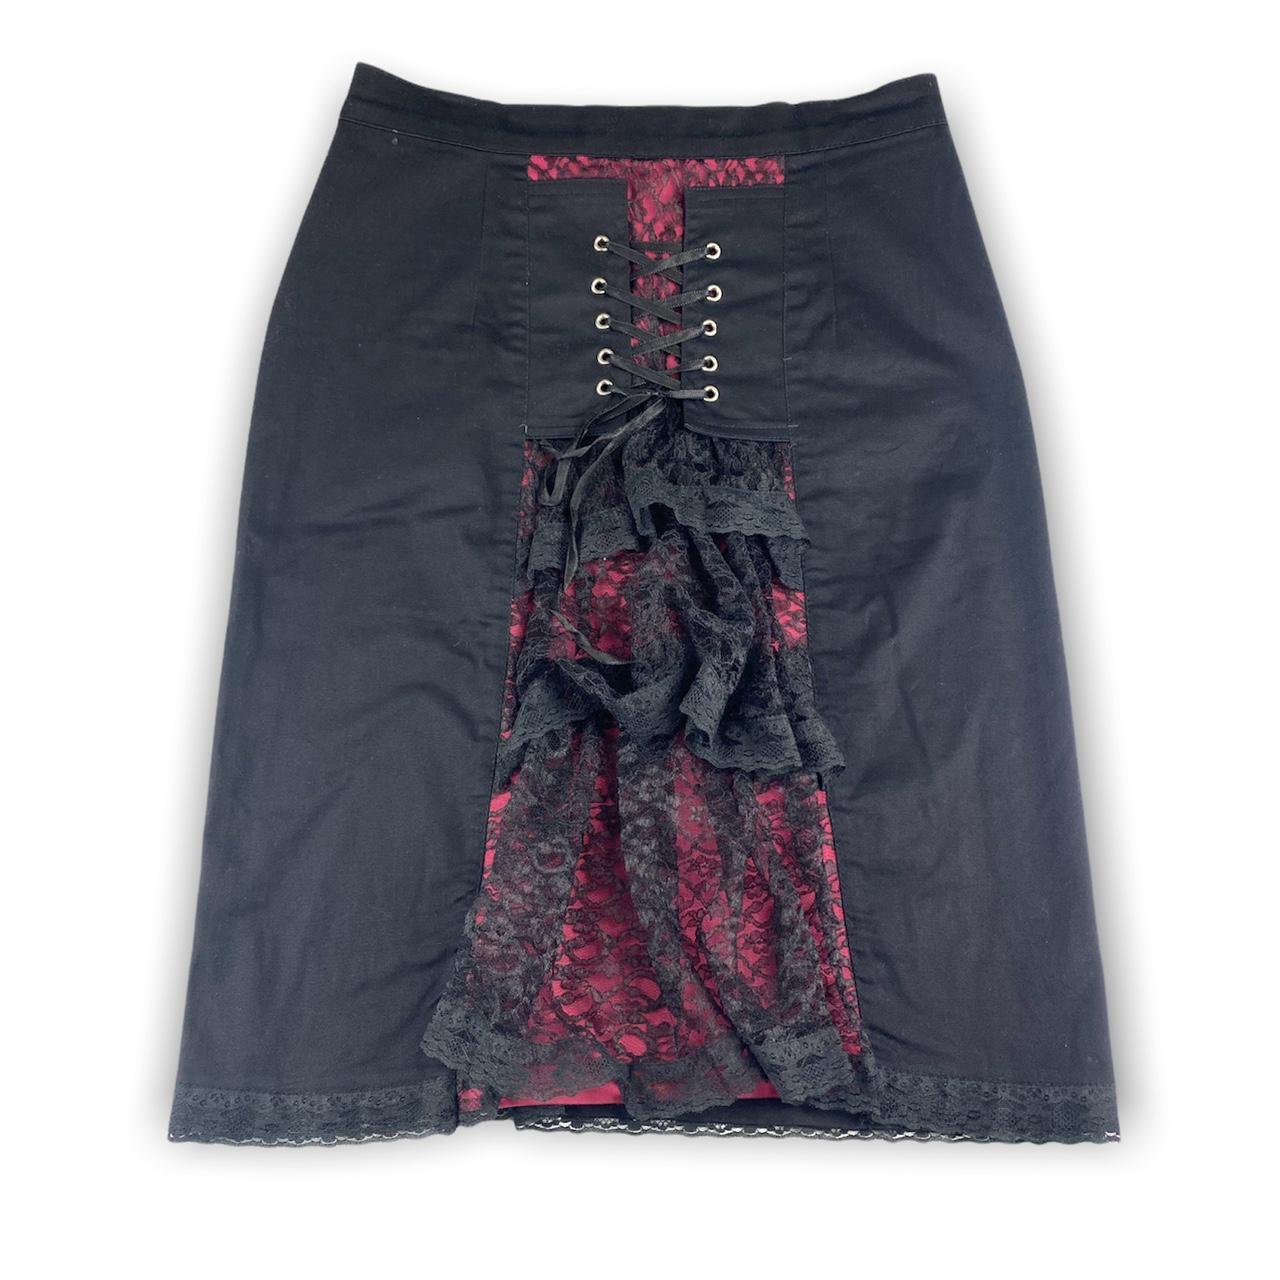 Product Image 1 - 🕯Lydia skirt🕯
DM offers<3
Deadstock NWT y2k